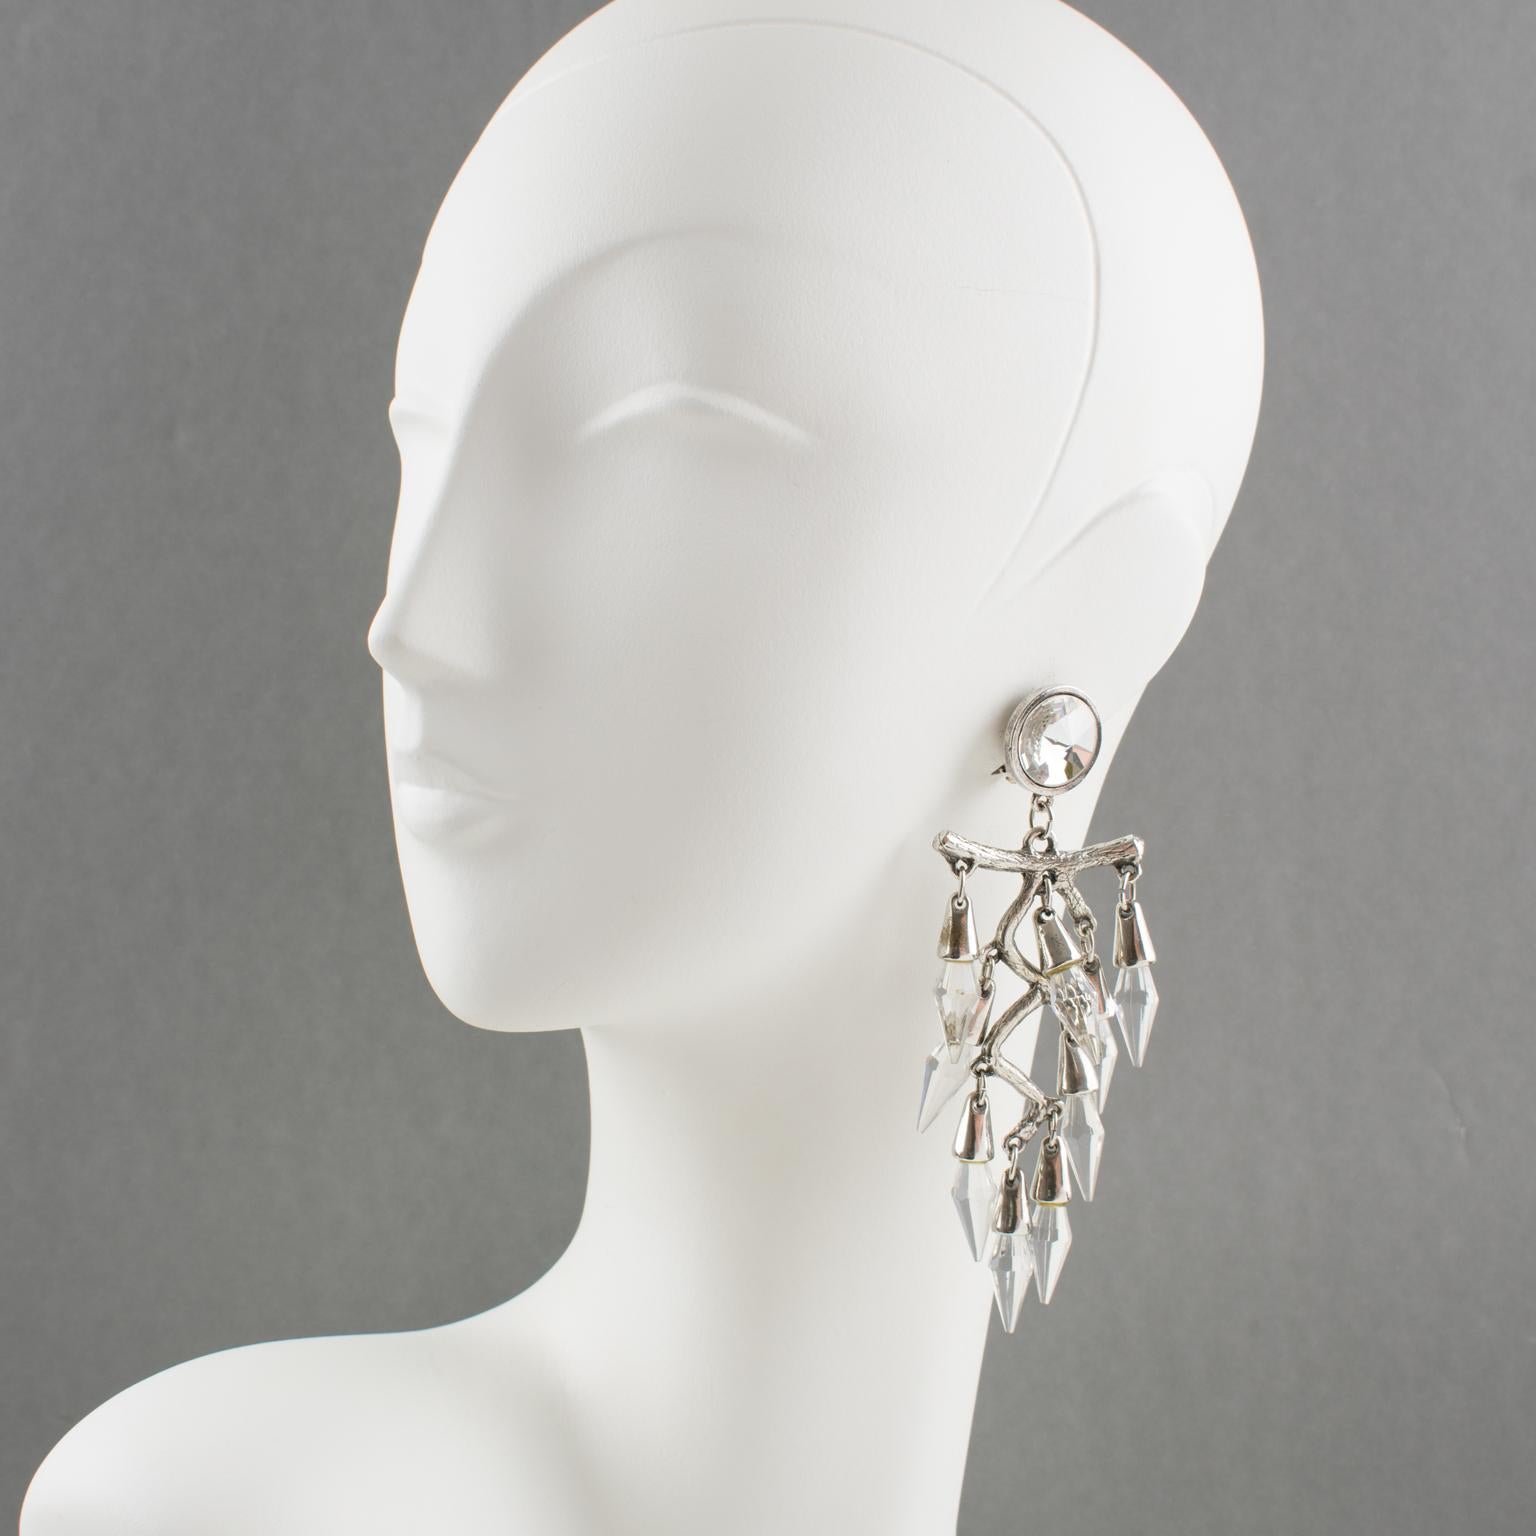 These lovely oversized chandelier clip-on earrings boast a romantic design with a dangle shape and a large silver plate metal carved stylized branch framing complimented with crystal faceted drop beads. There is no visible maker's